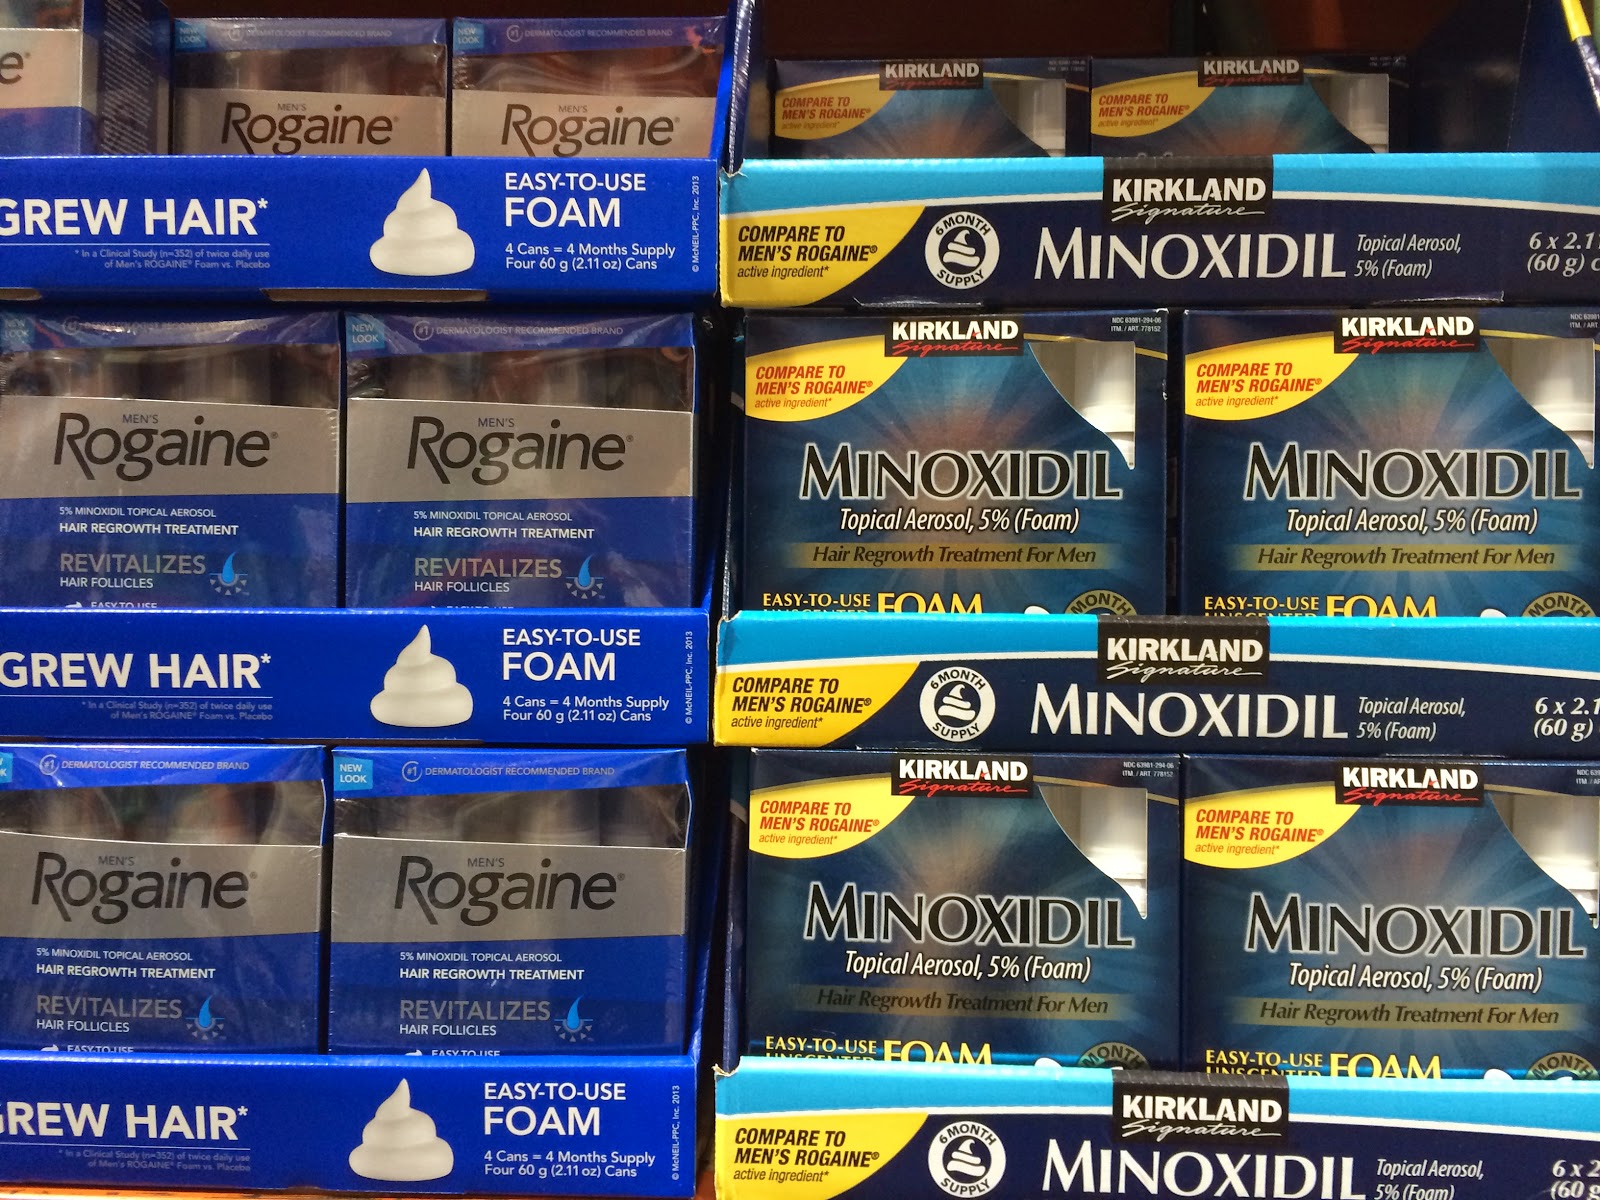 is minoxidil better than rogaine